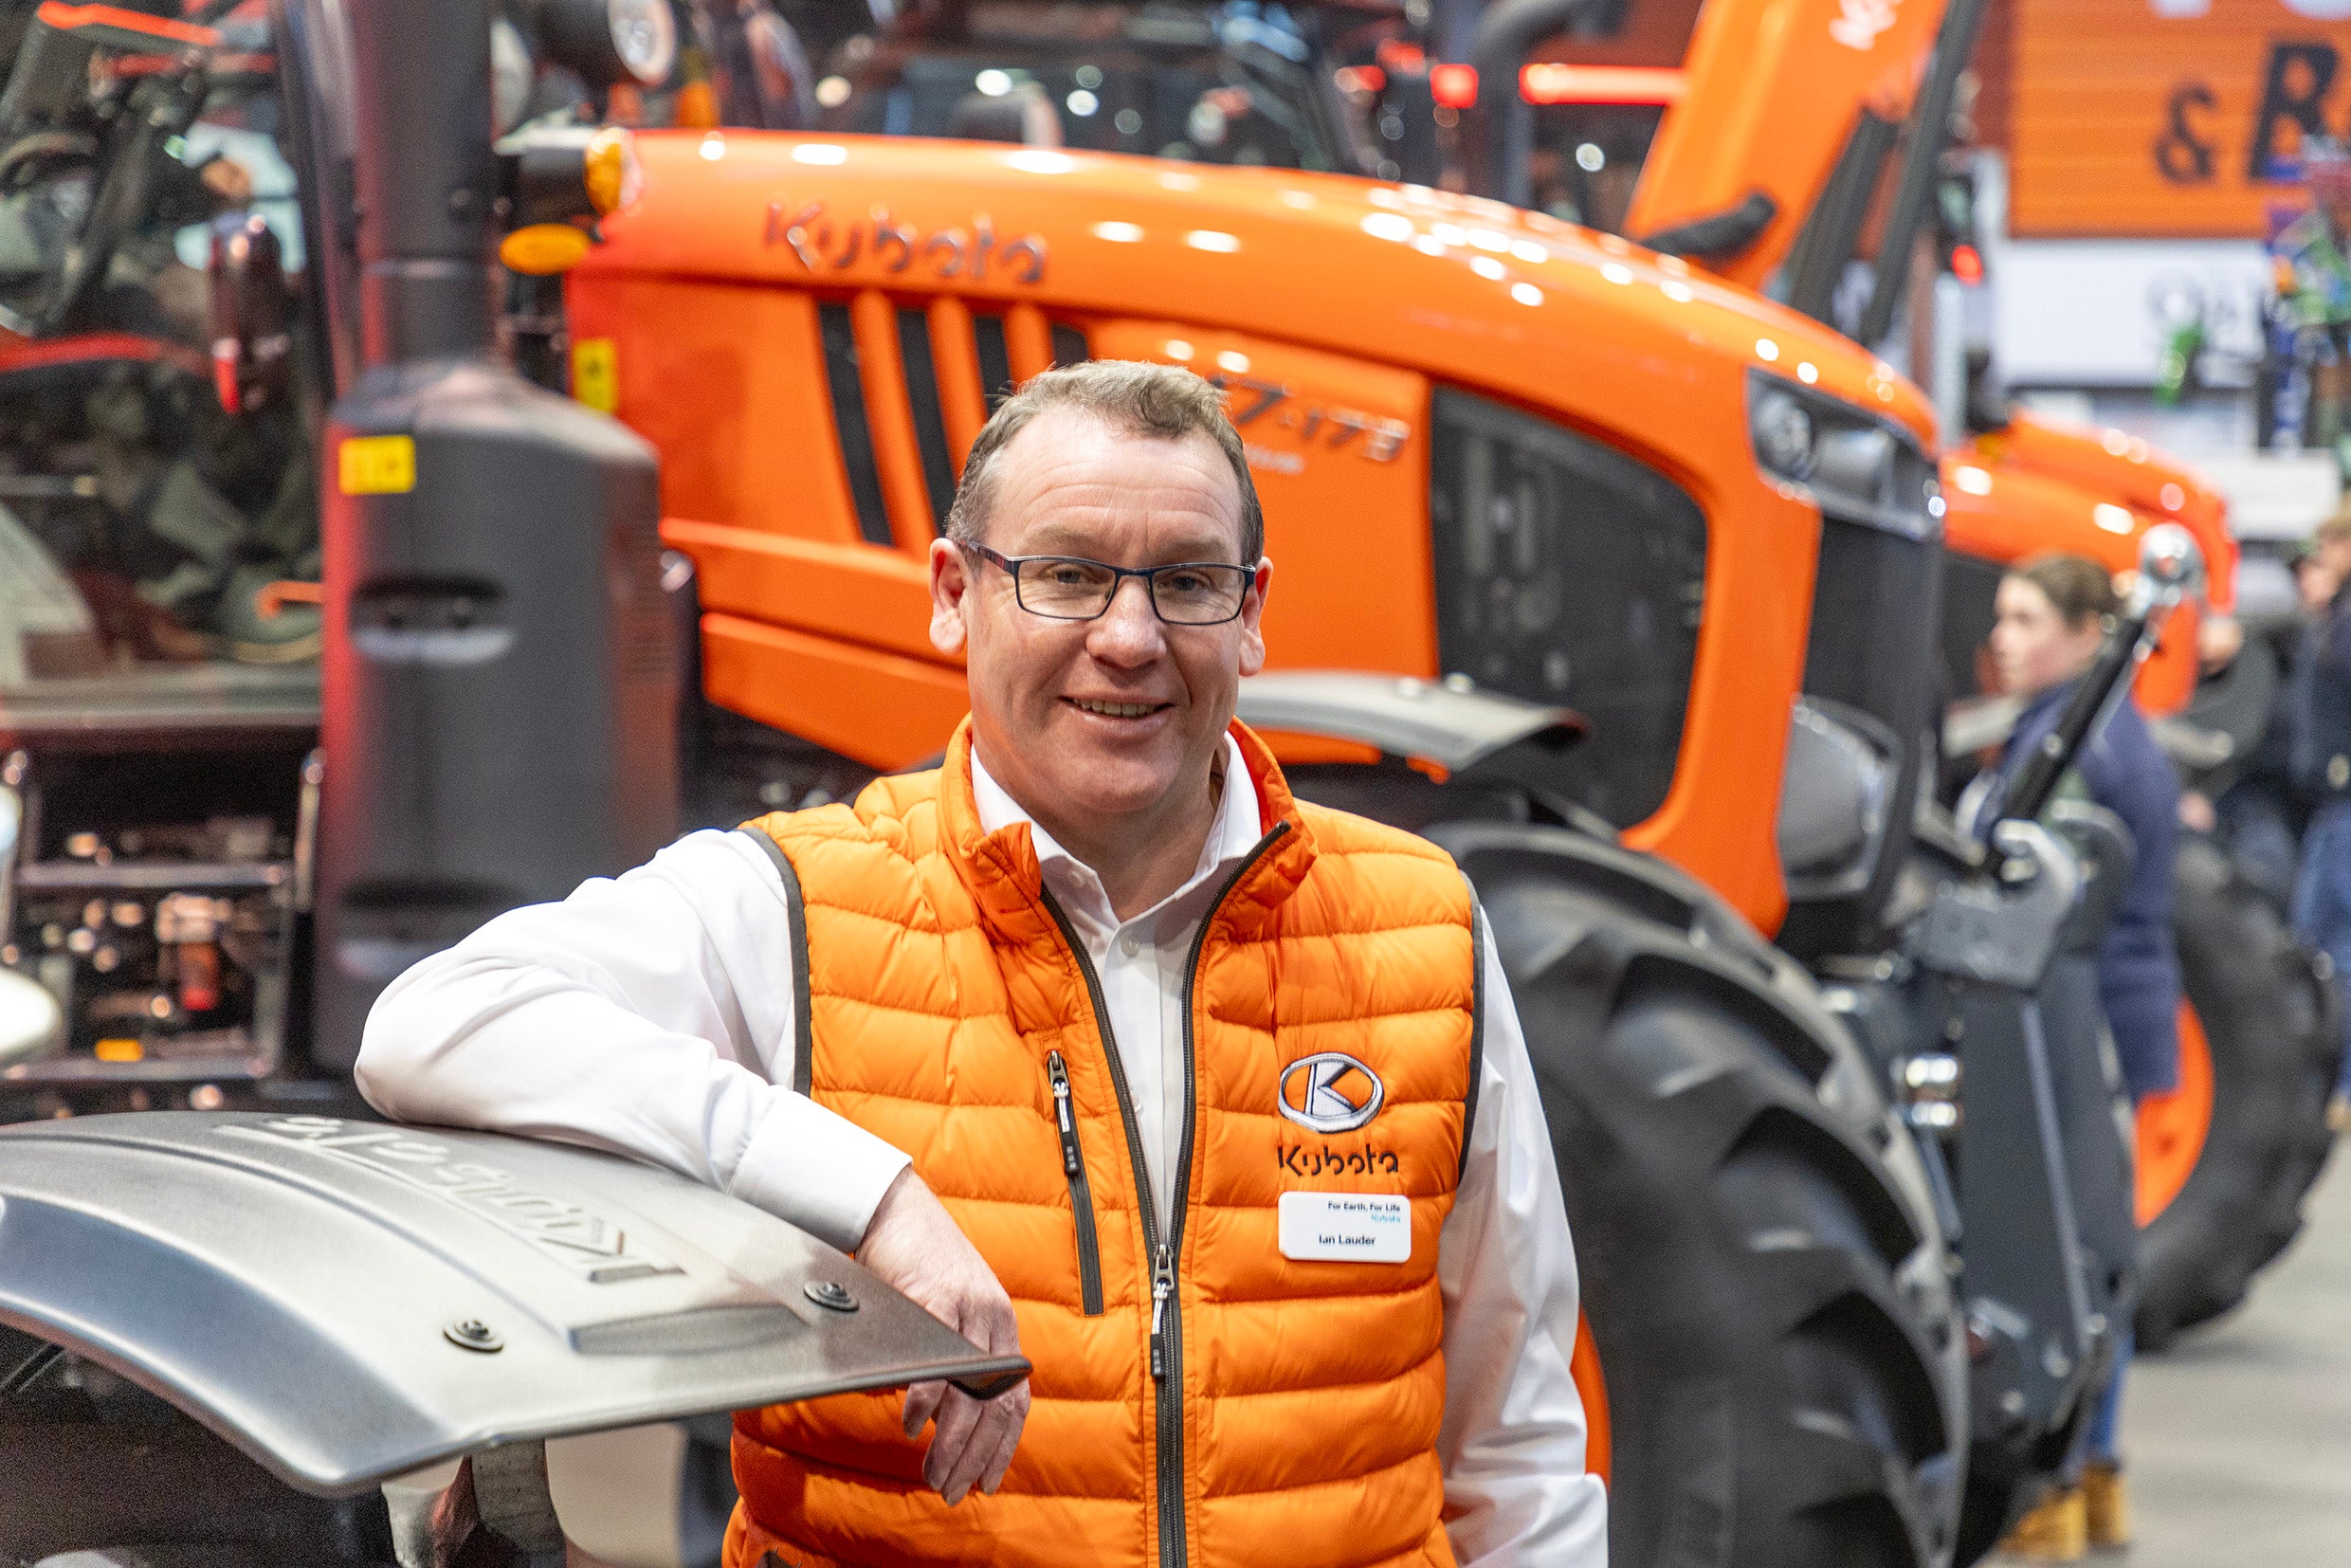 Kubota appoints Ian Lauder as dealer manager for Scotland and the north of England